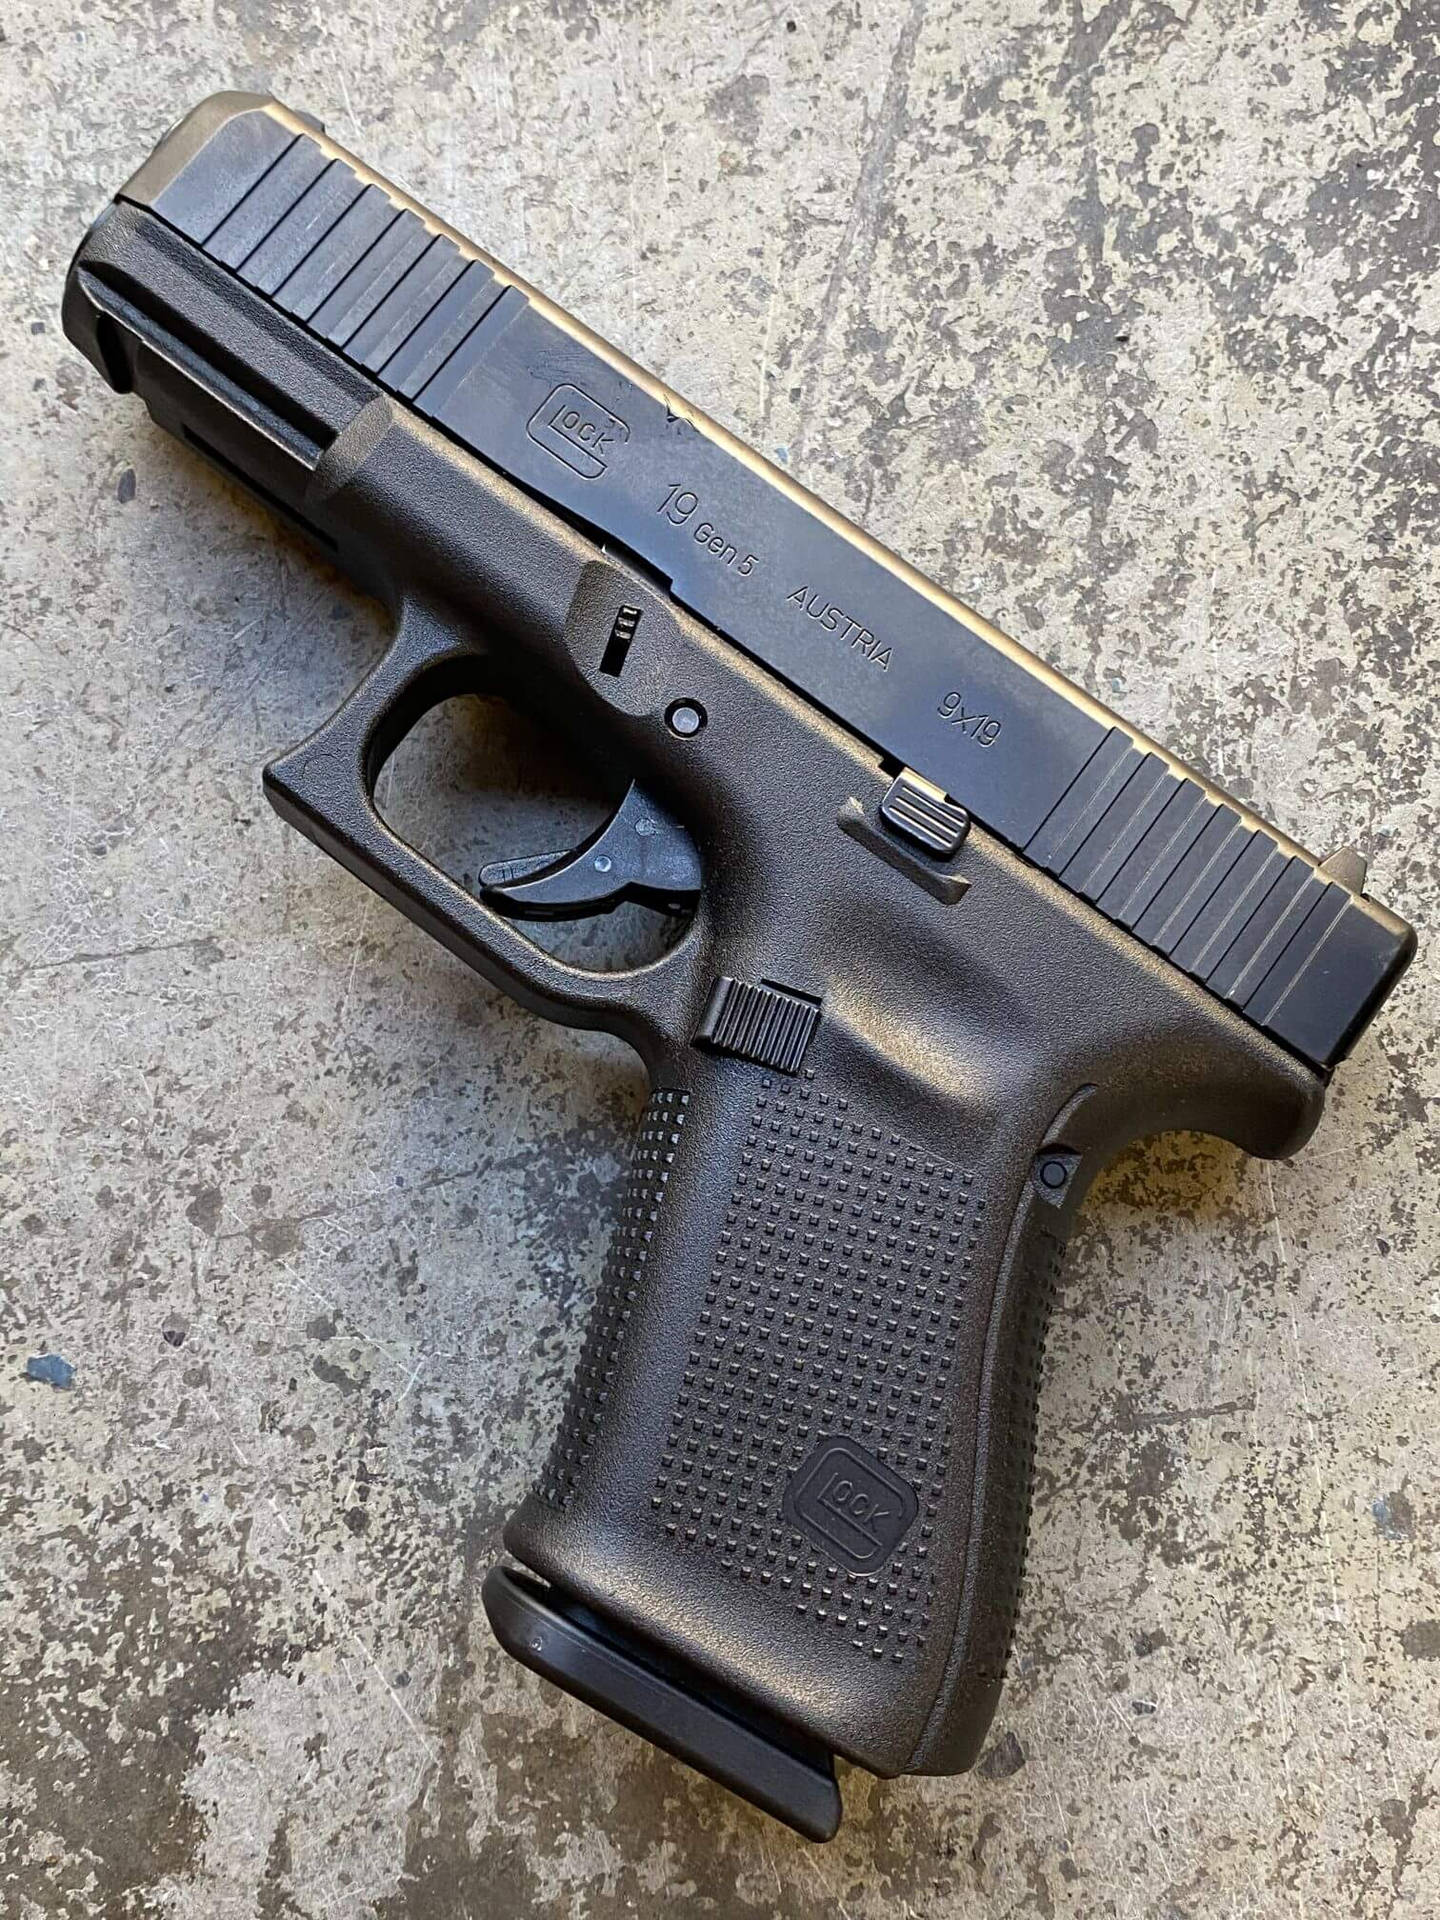 A Close-up View Of A Glock 19 Gen 5 Pistol Background